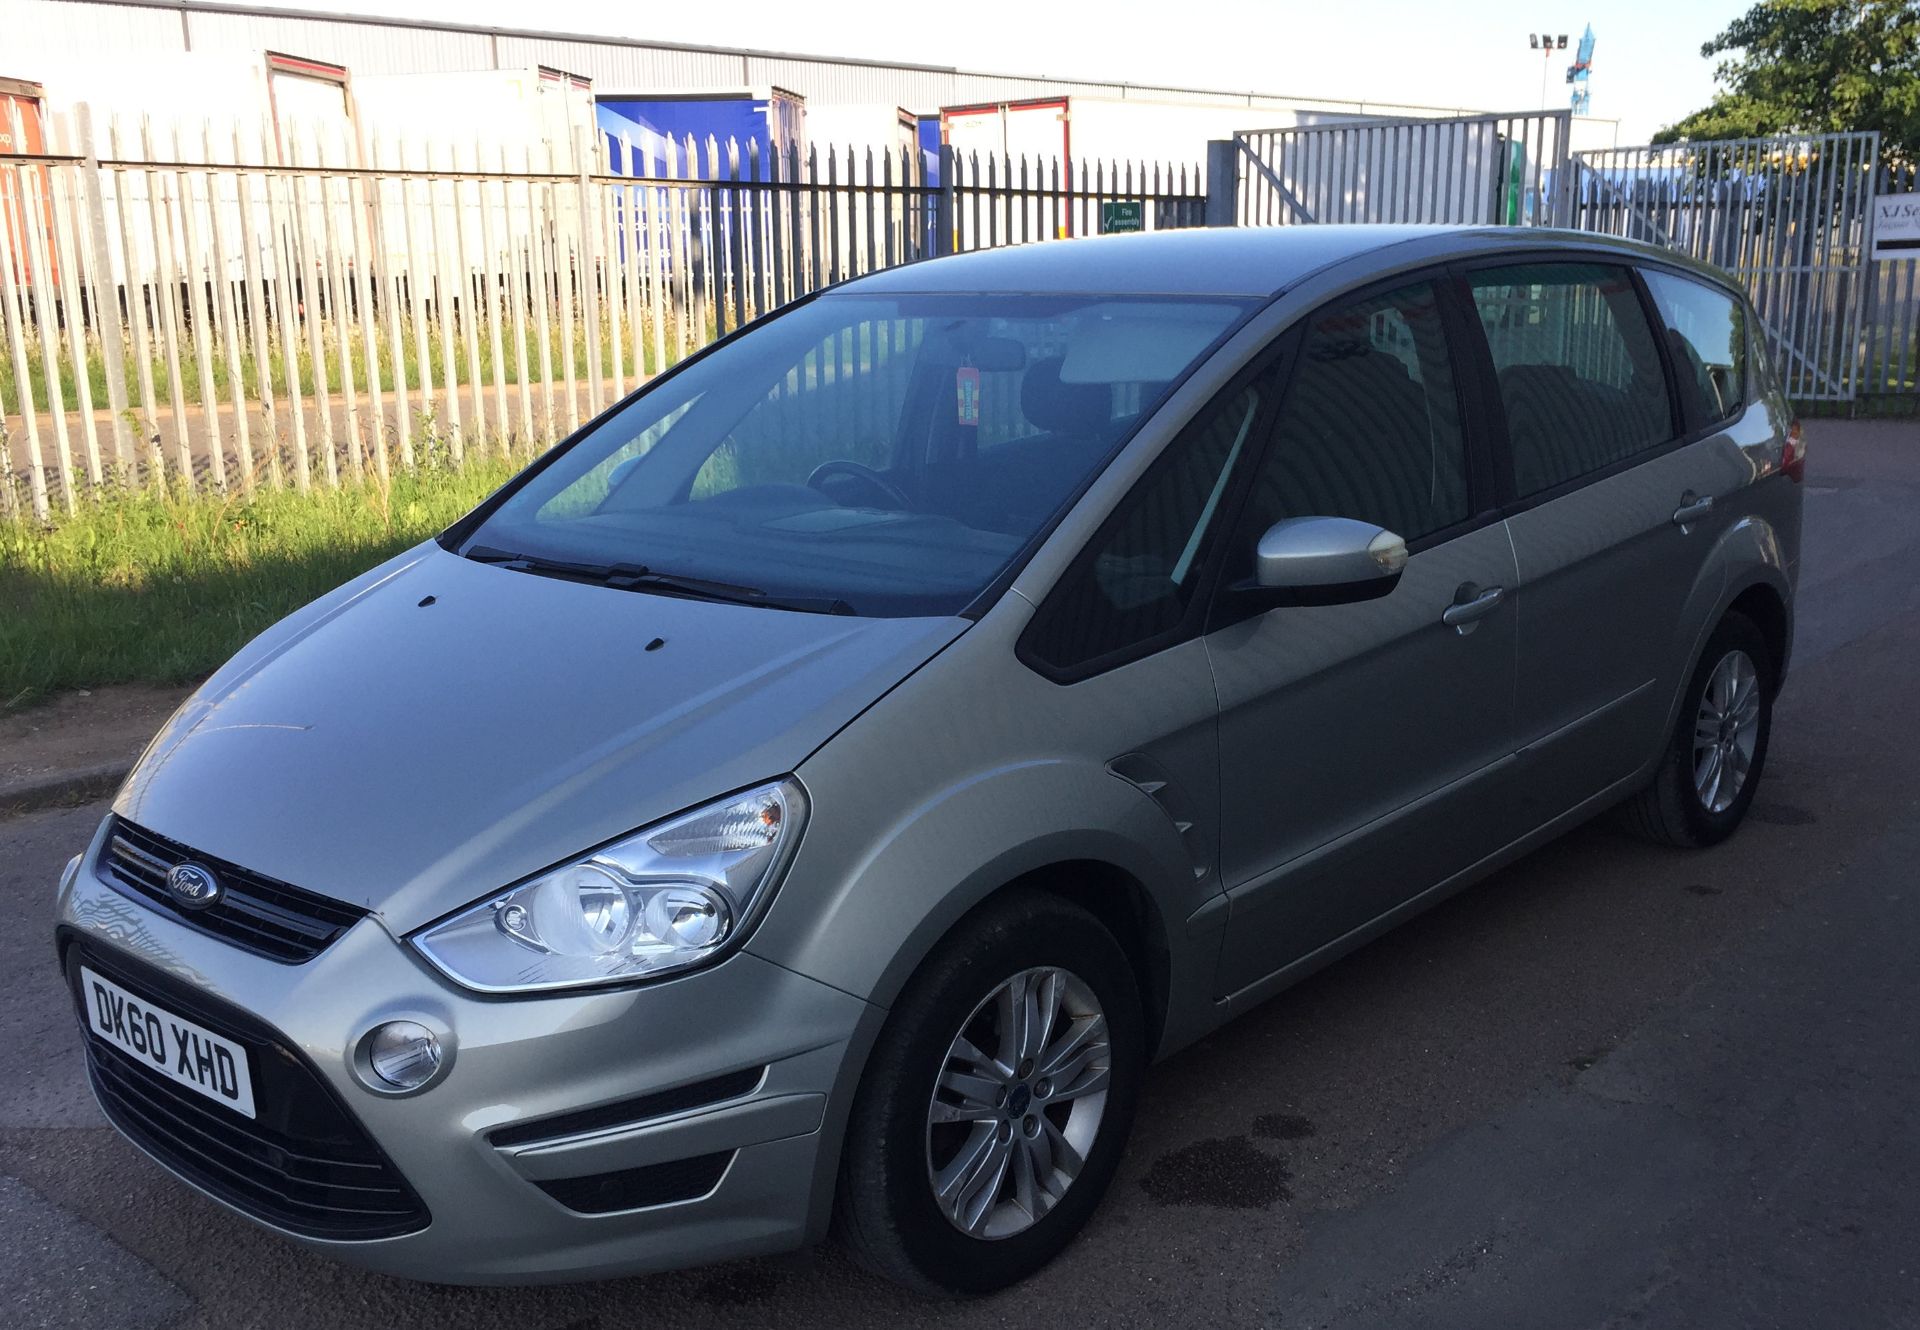 2010 Ford Smax 2.0 TDCI Zetec 5 Door MPV - CL505 - NO VAT ON THE HAMMER - Location: Corby, - Image 5 of 18